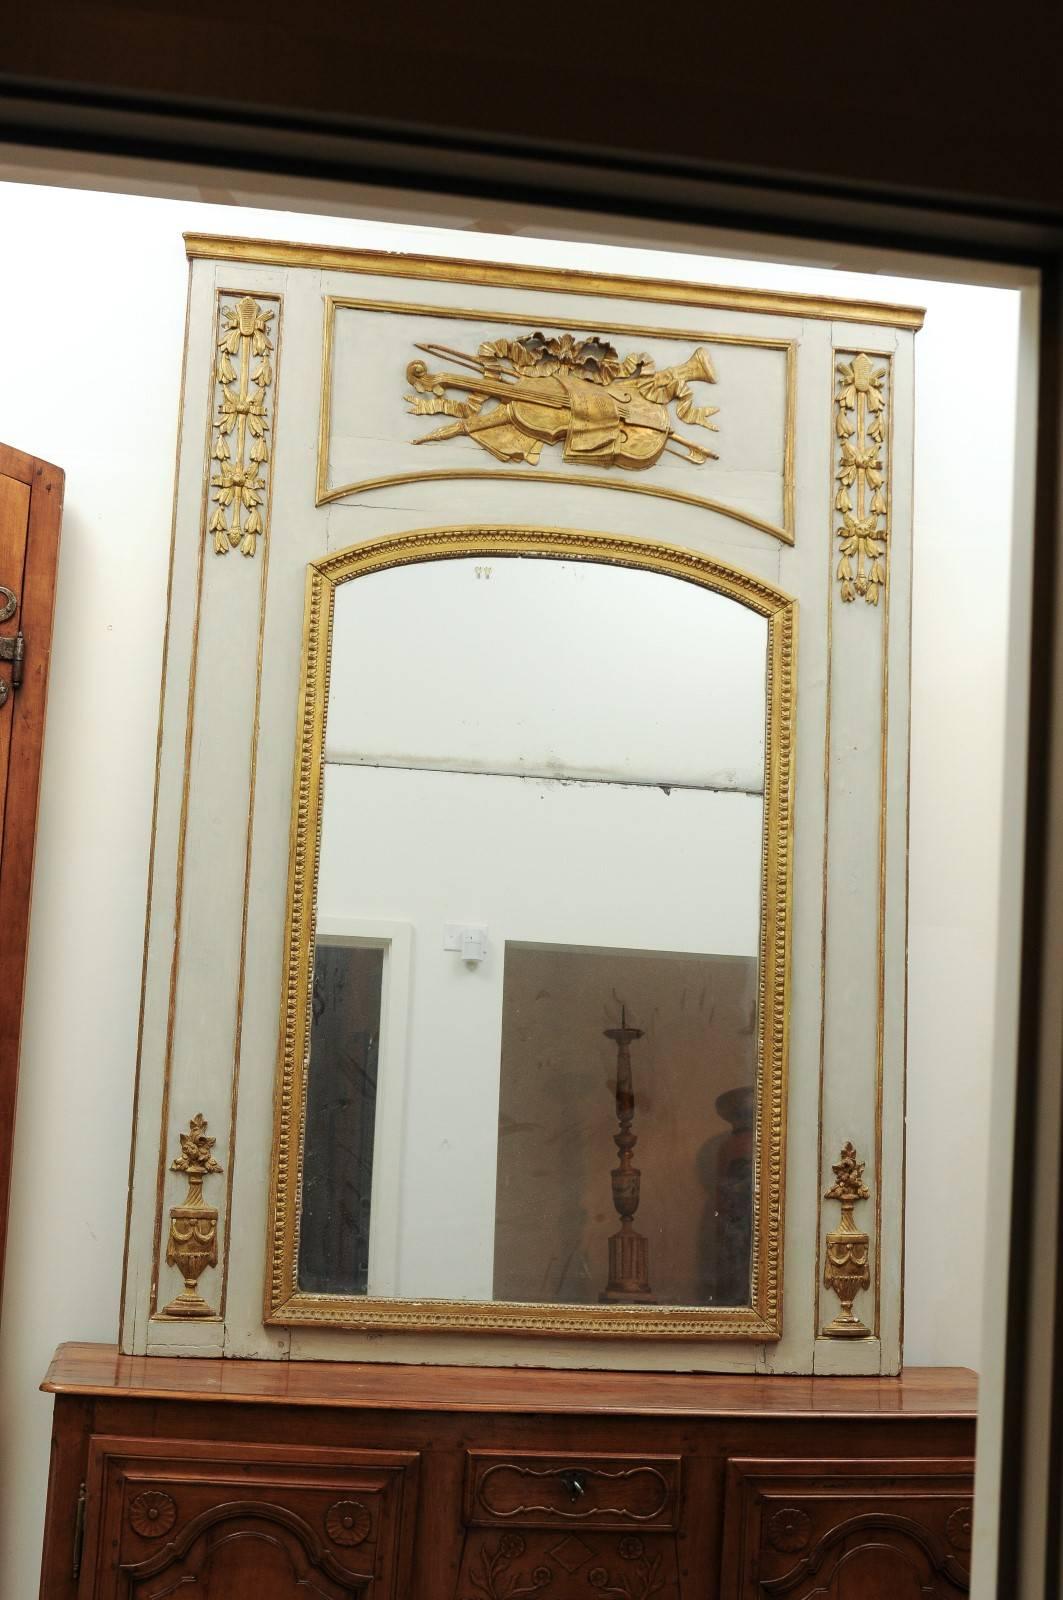 A French Louis XVI period 18th century painted and gilt trumeau mirror with evocation of the arts and original glass. This French Louis XVI large trumeau mirror features a light grey painted linear frame, highlighted with giltwood accents. Our eye